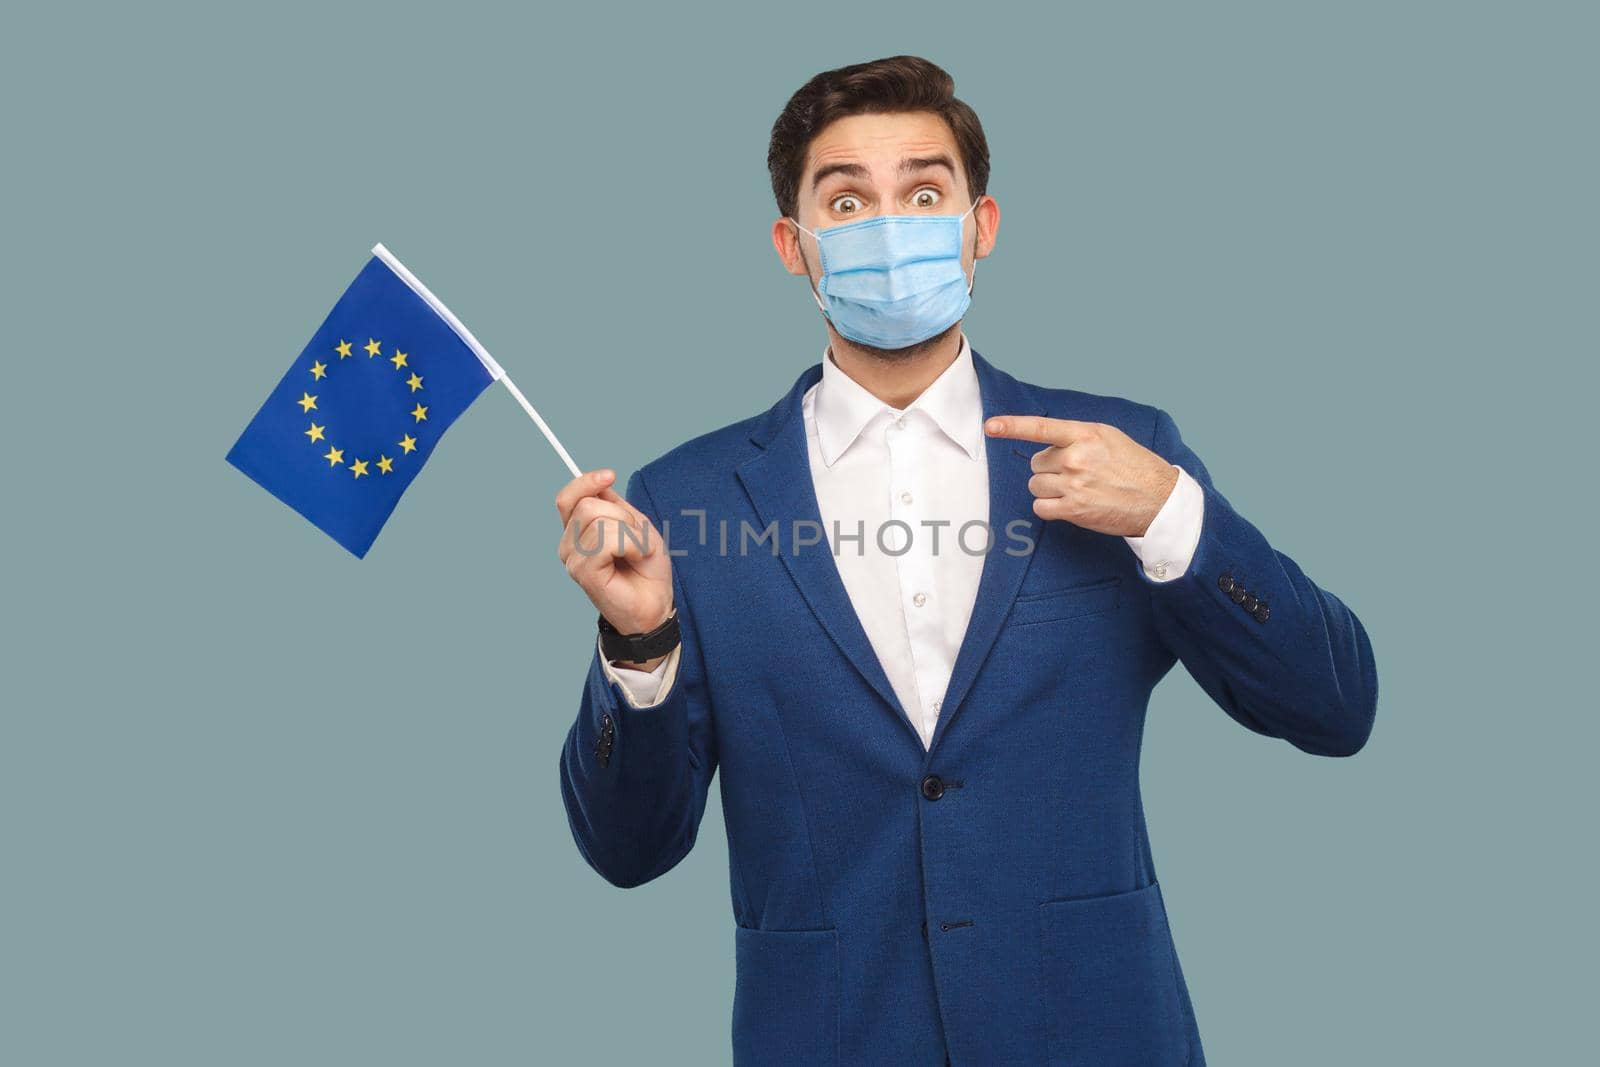 Young man with surgical medical mask in blue jacket holding and pointing at European union flag and looking at camera with big eyes and shocked faee. Indoor, studio shot isolated on blue background.